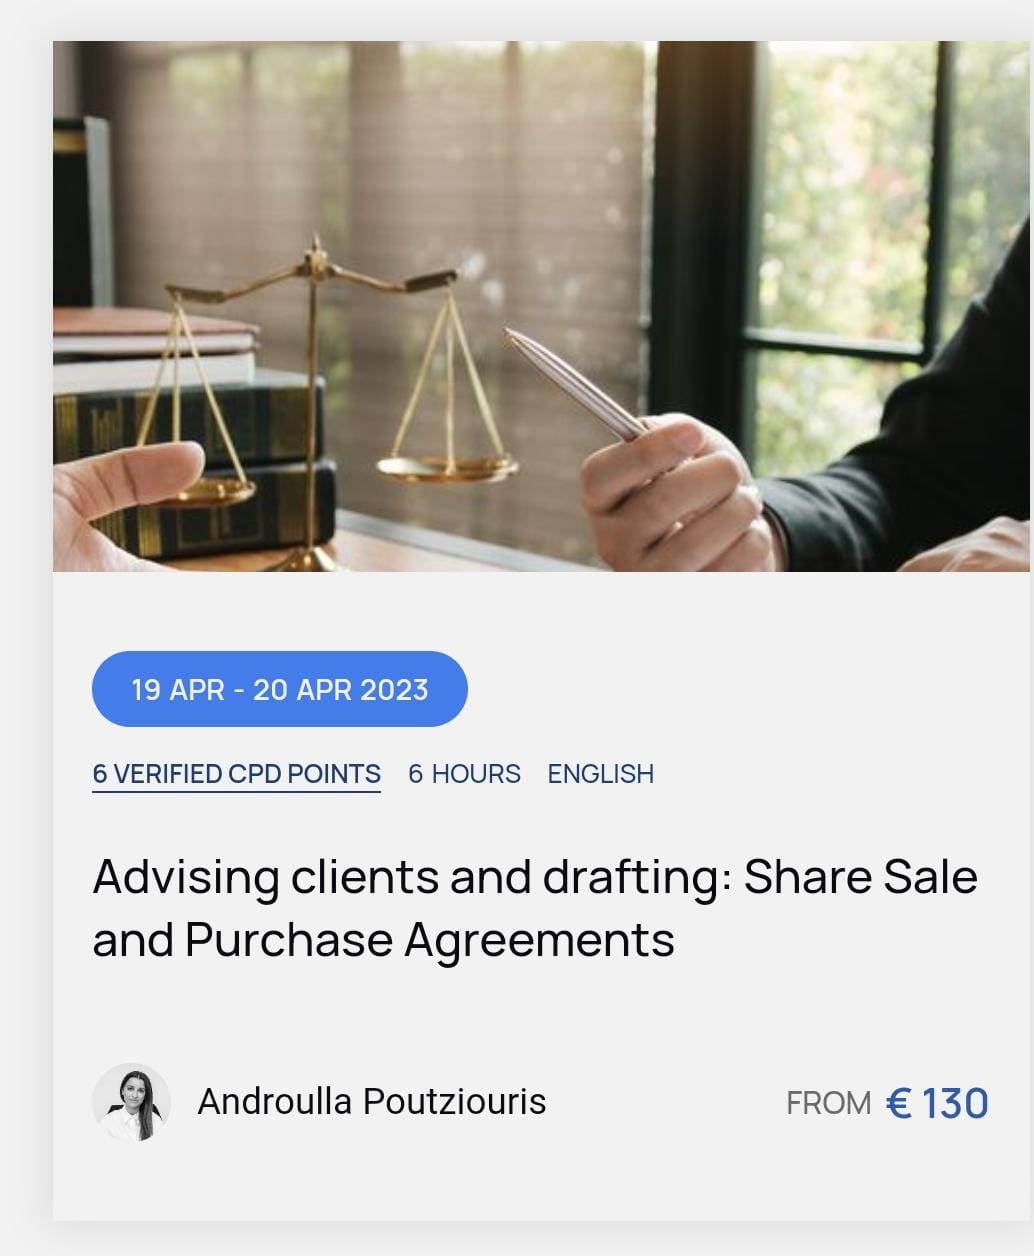 Advising clients and drafting: Share Sale and Purchase Agreements